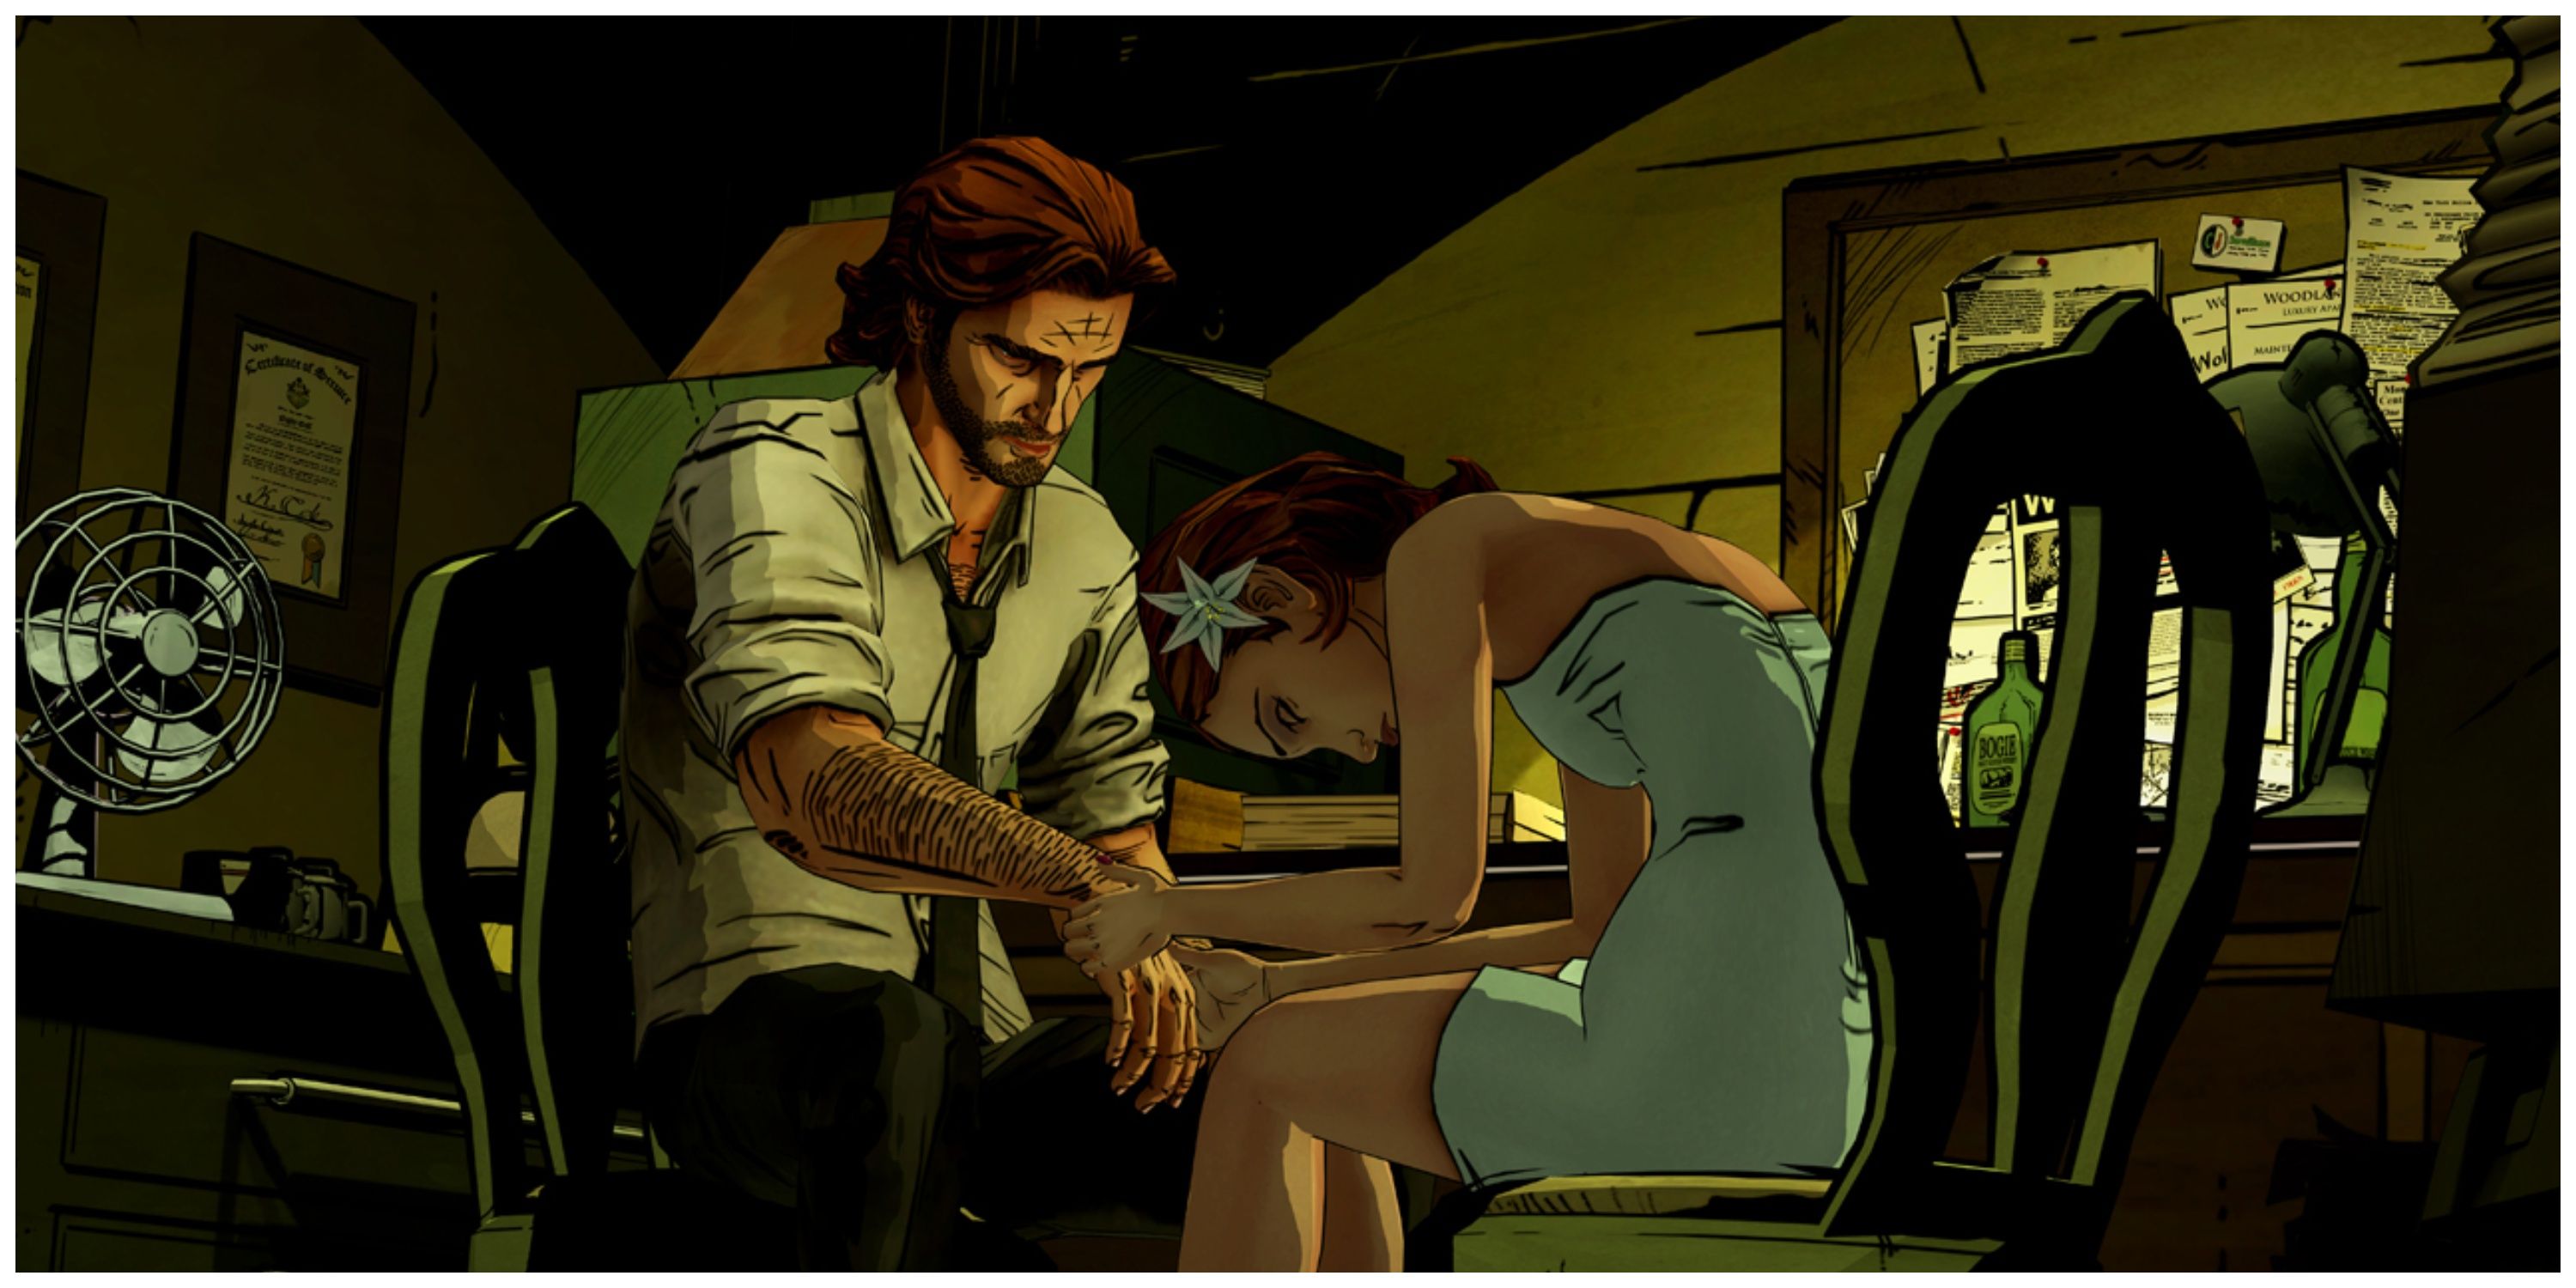 The Wolf Among Us - Bigby Wolf In An Office